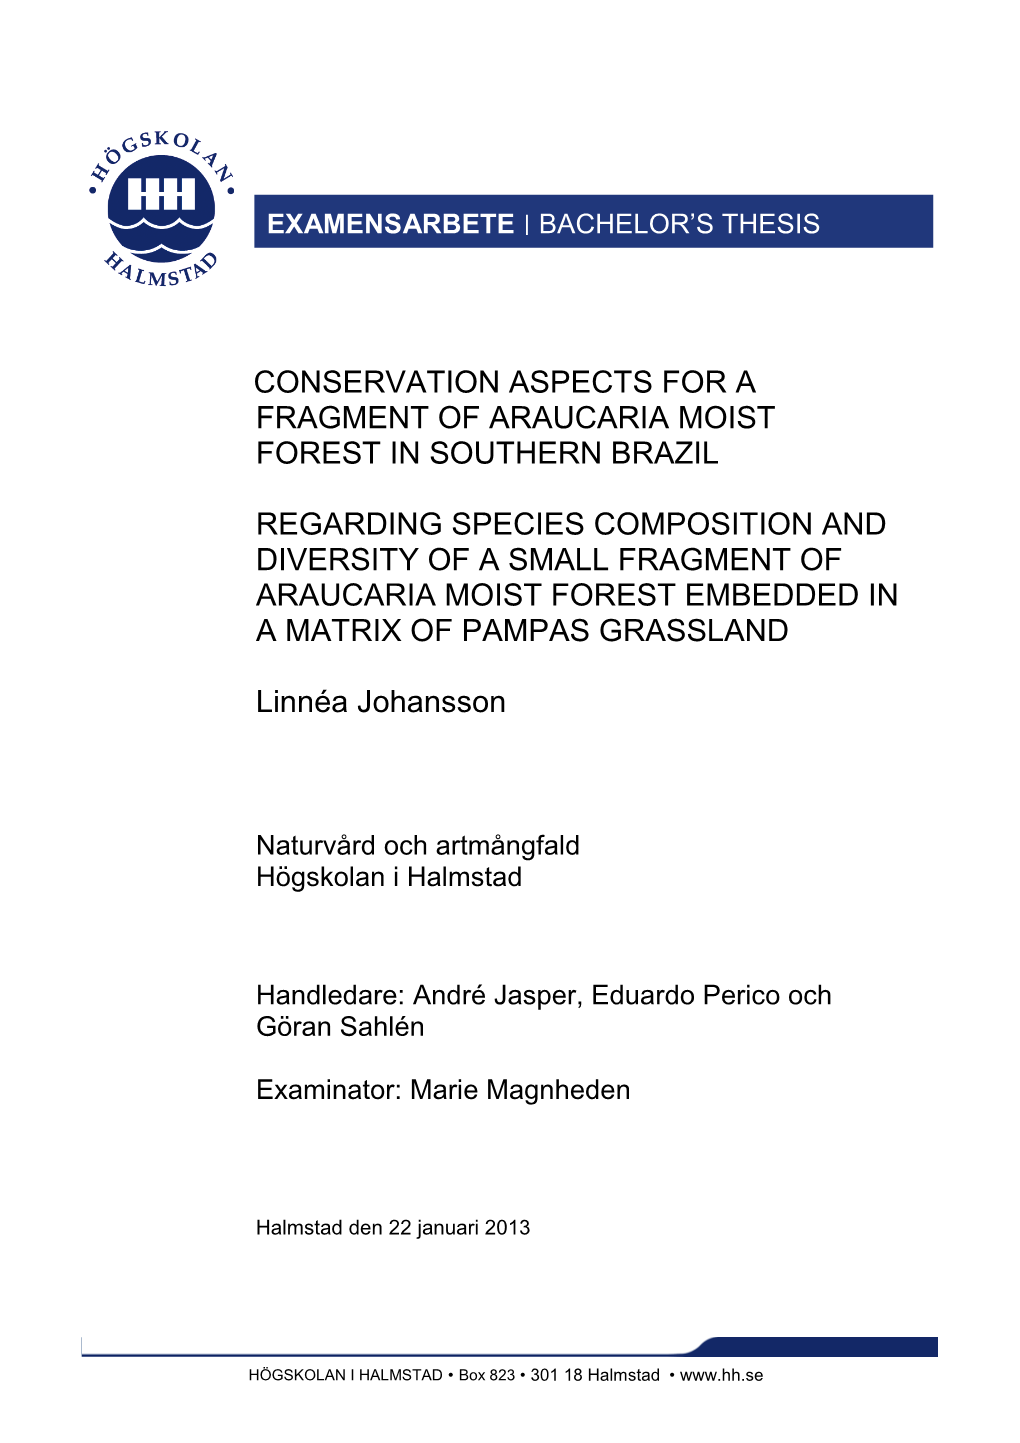 Conservation Aspects for a Fragment of Araucaria Moist Forest in Southern Brazil